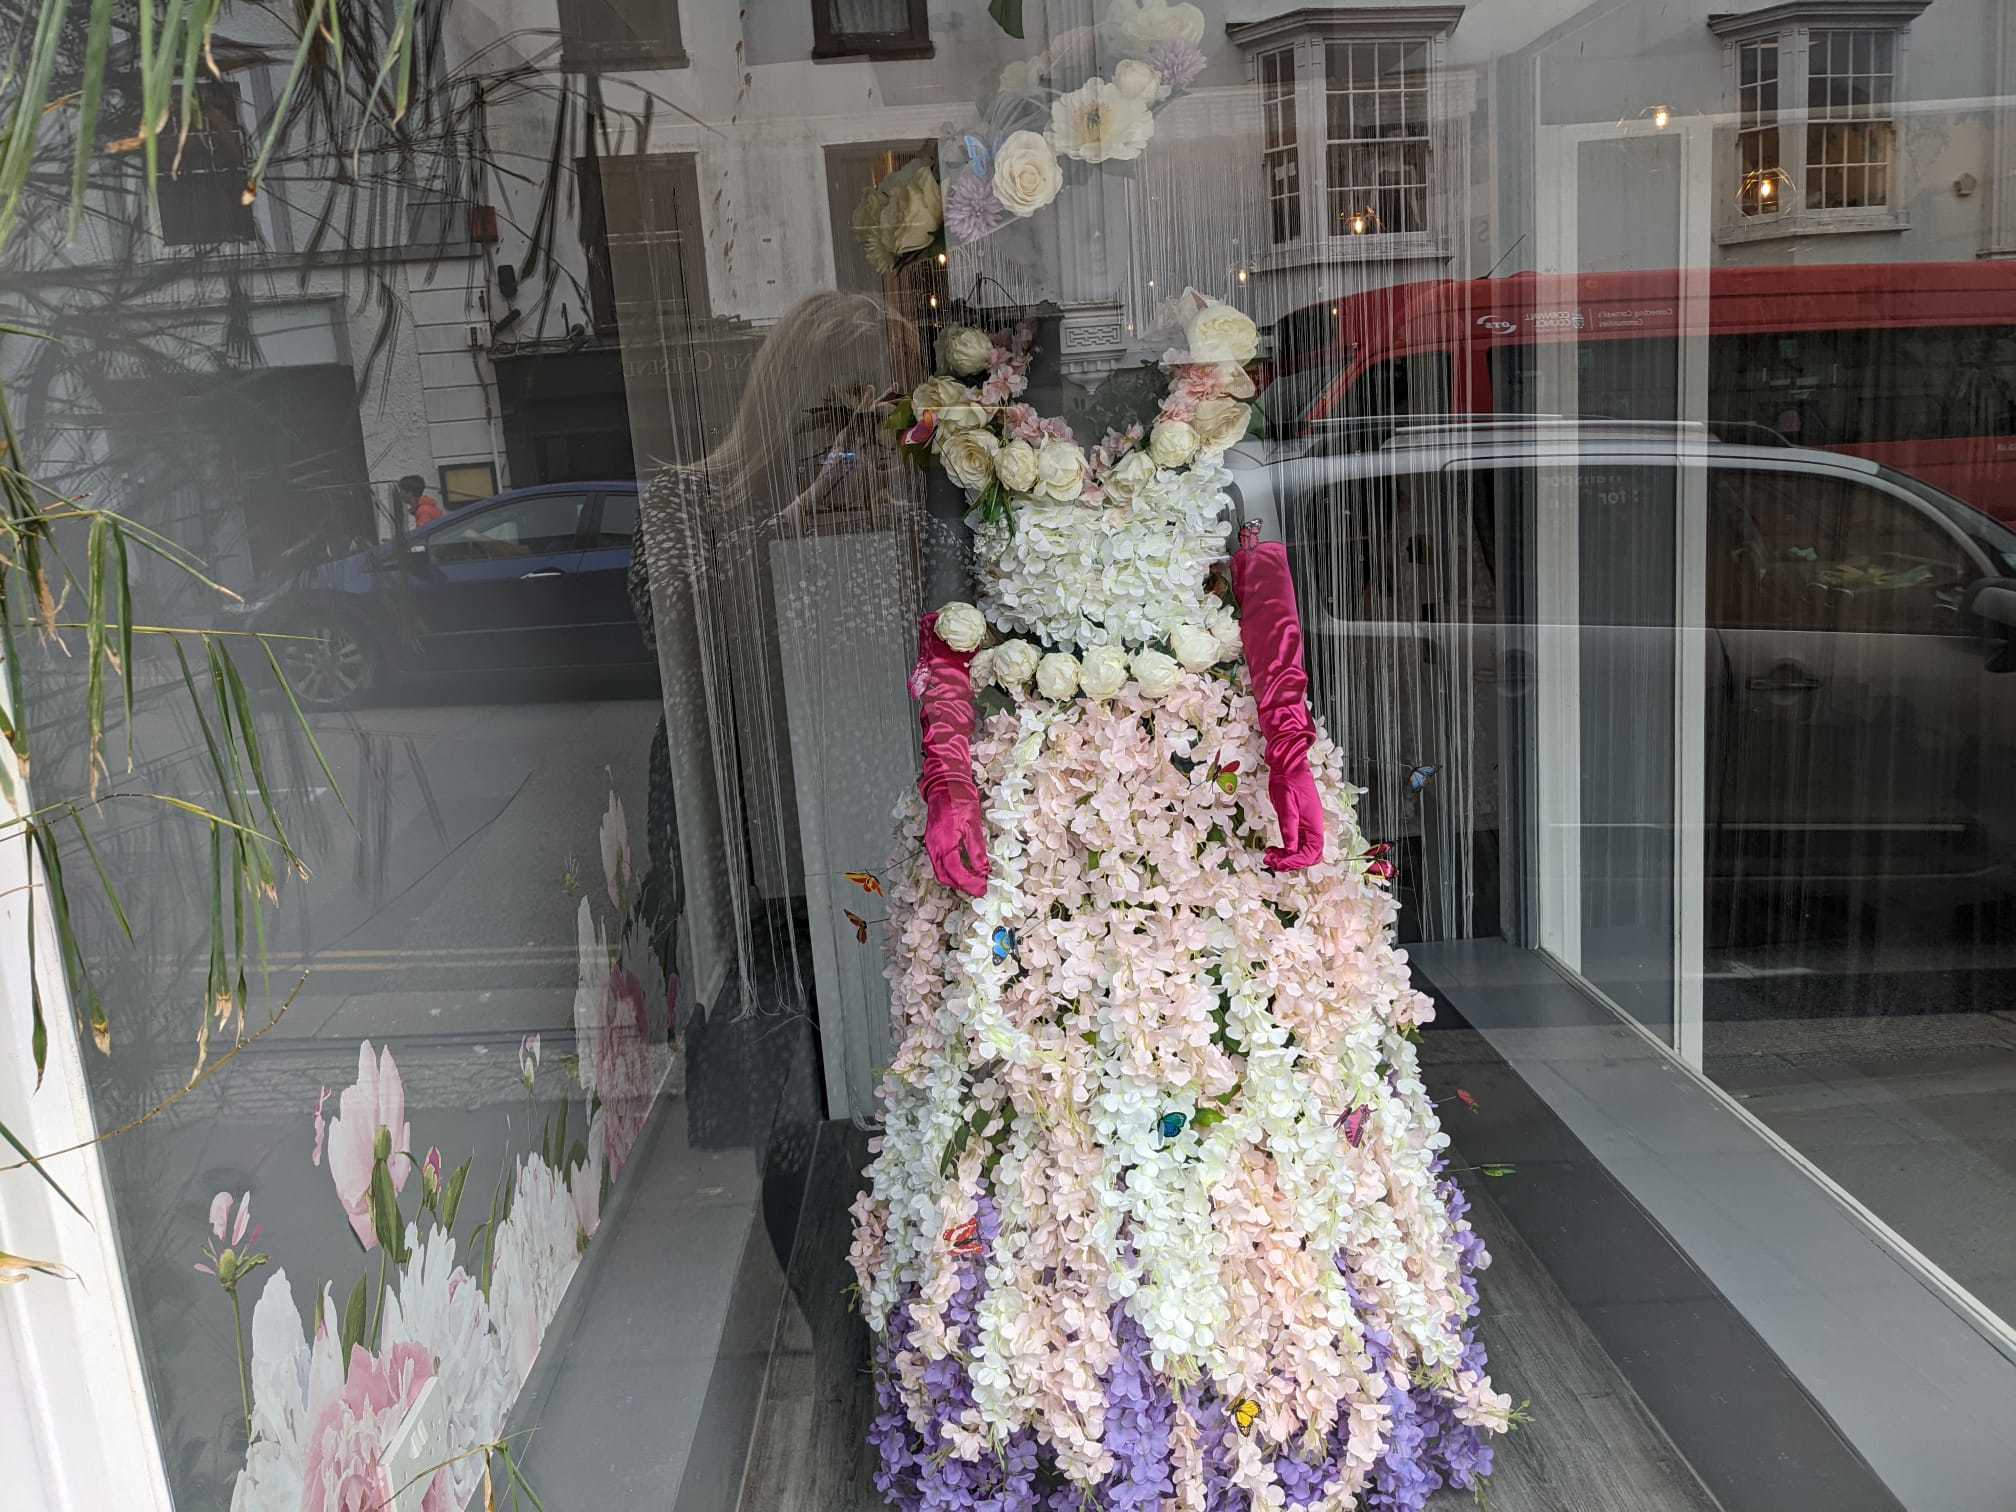 Tara Trethowan designed this Flora Day mannequin for her shop window display at The Bridal Studio